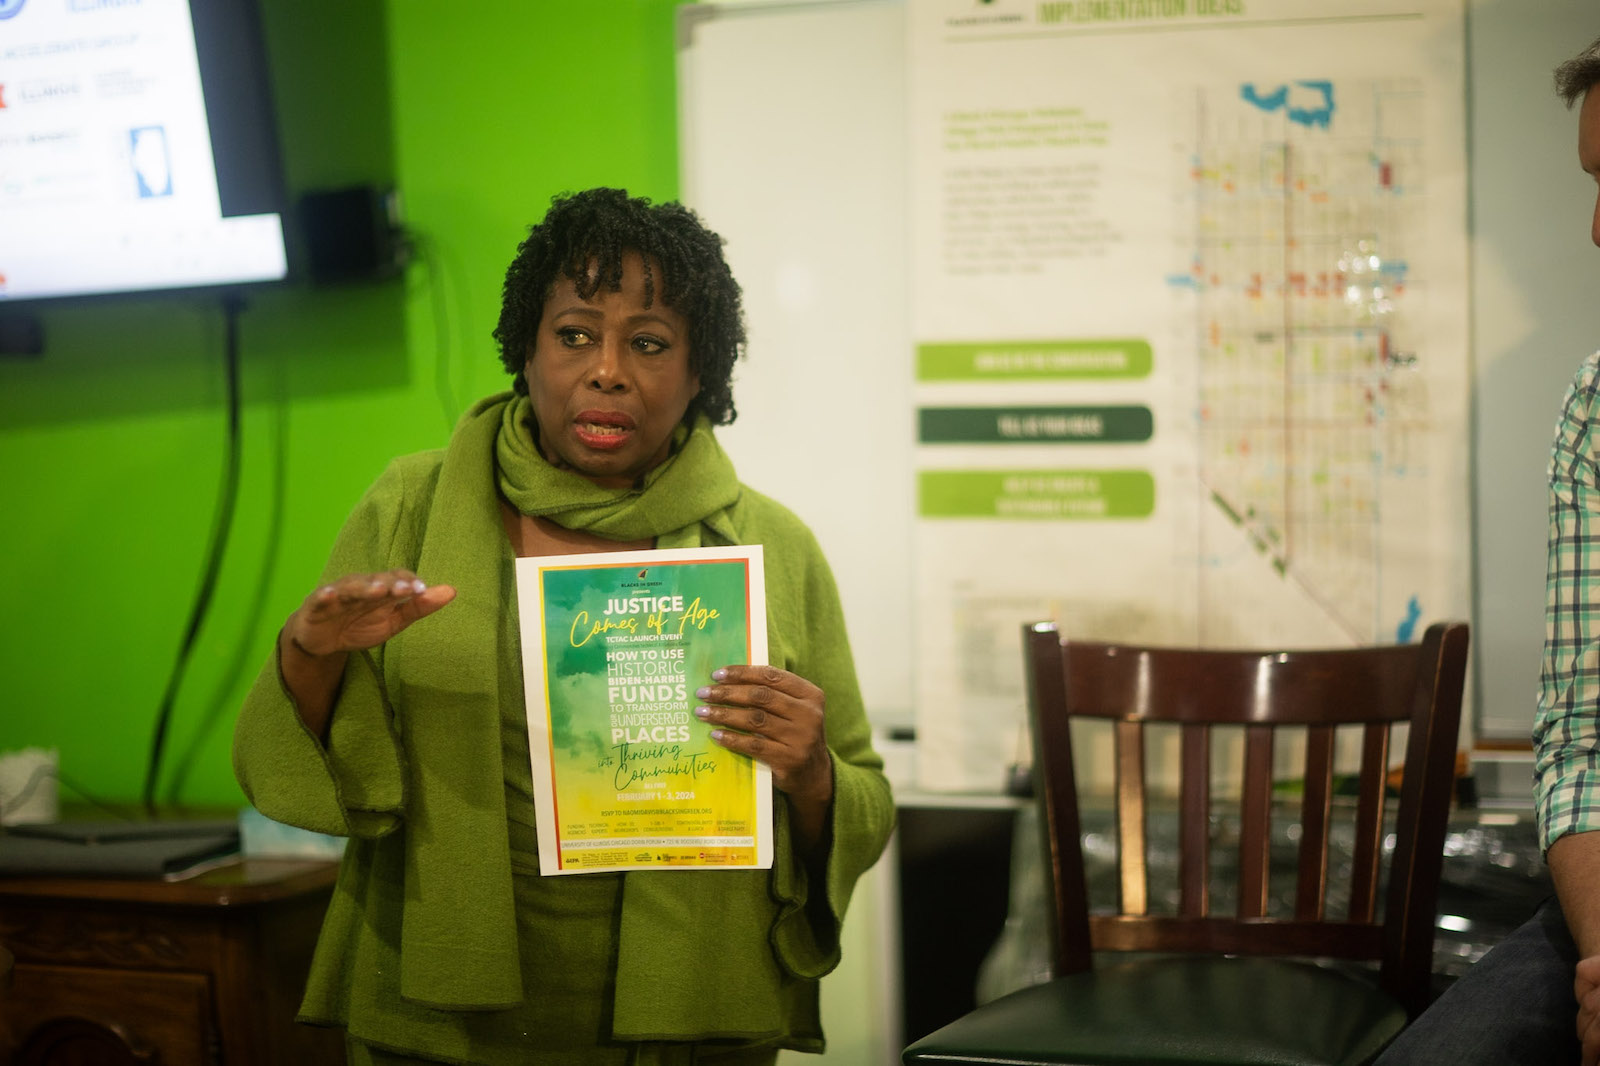 A woman in a green sweater holds a flyer while speaking in a bright green room